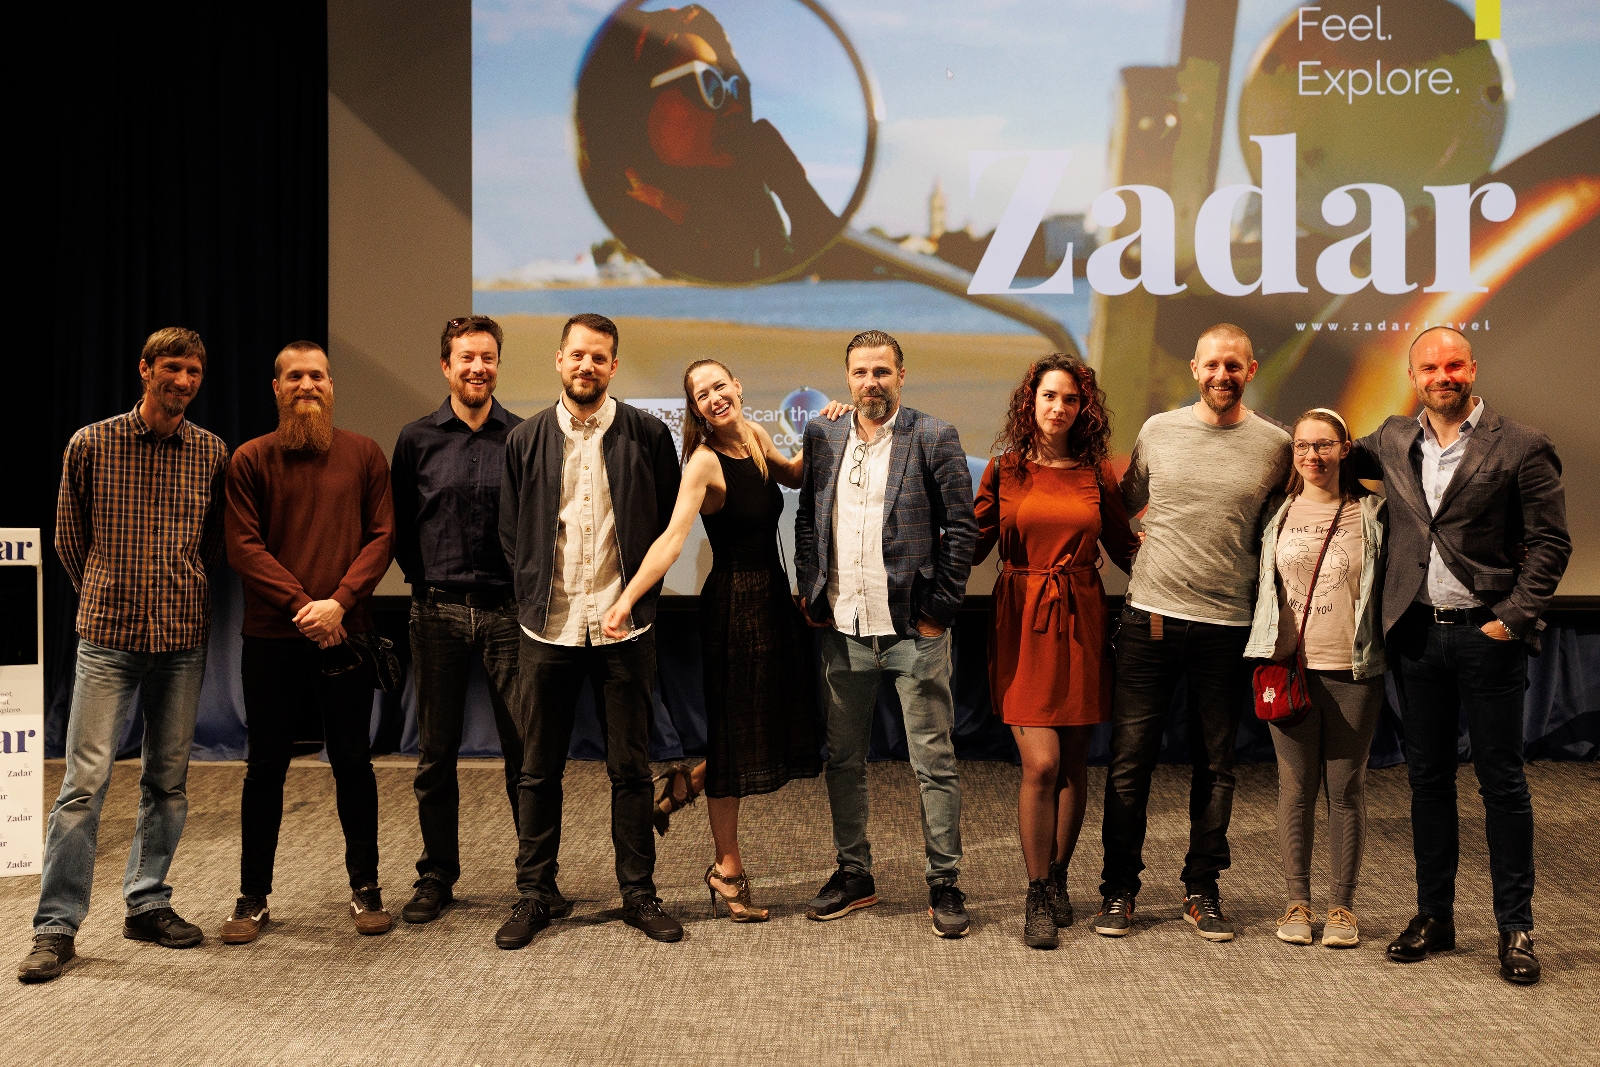 Watch the new Zadar promotional video